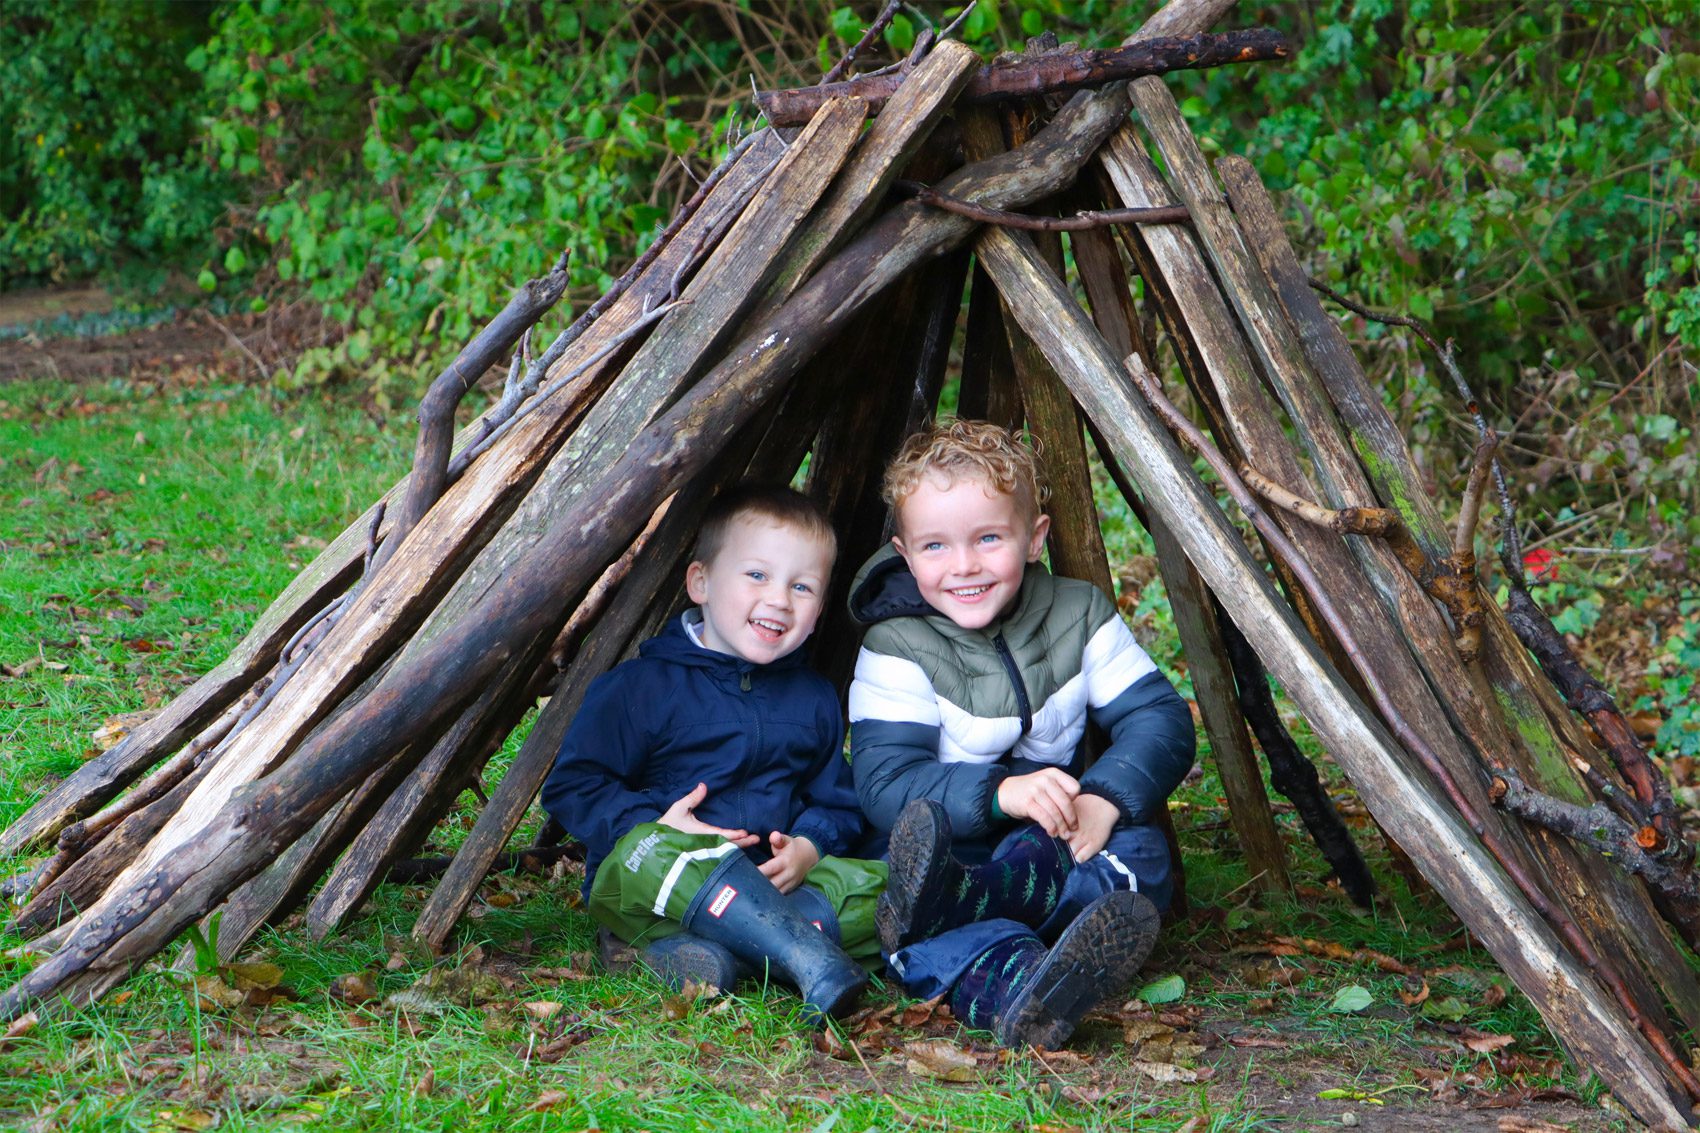 forest school at shorne primary school with two smiling kids underneath a wood structure